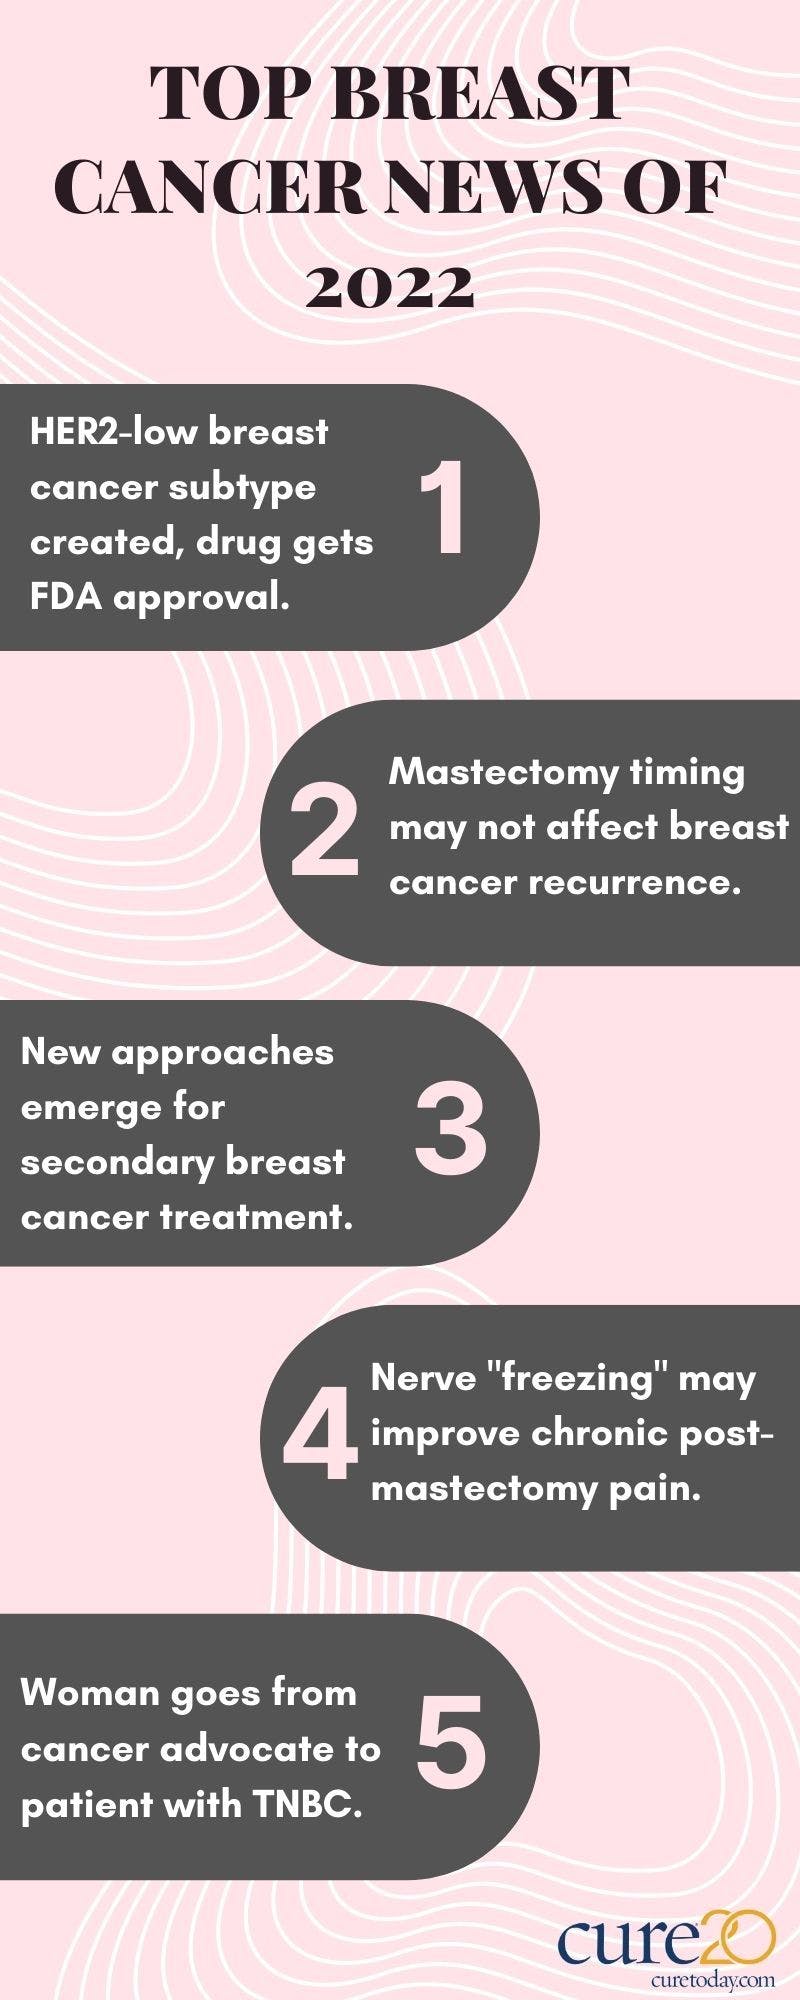 5 top breast cancer articles 